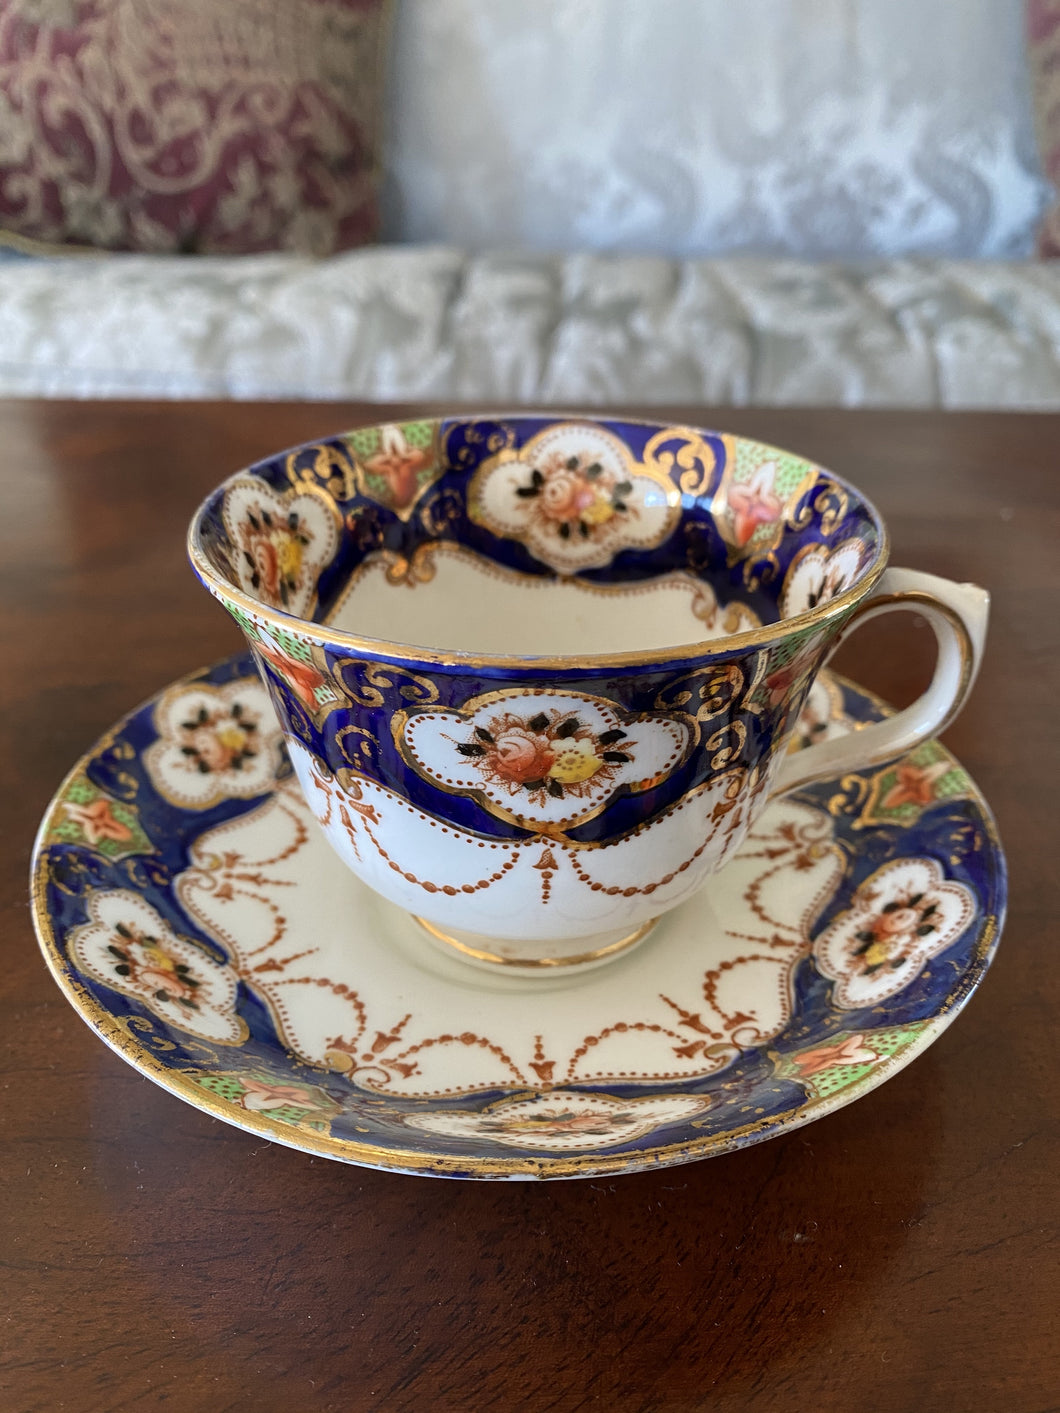 JP0006 1920 - 1935 Vintage Royal Albert Crown Bone China Teacup and Saucer with gold trim in a dark blue ornate